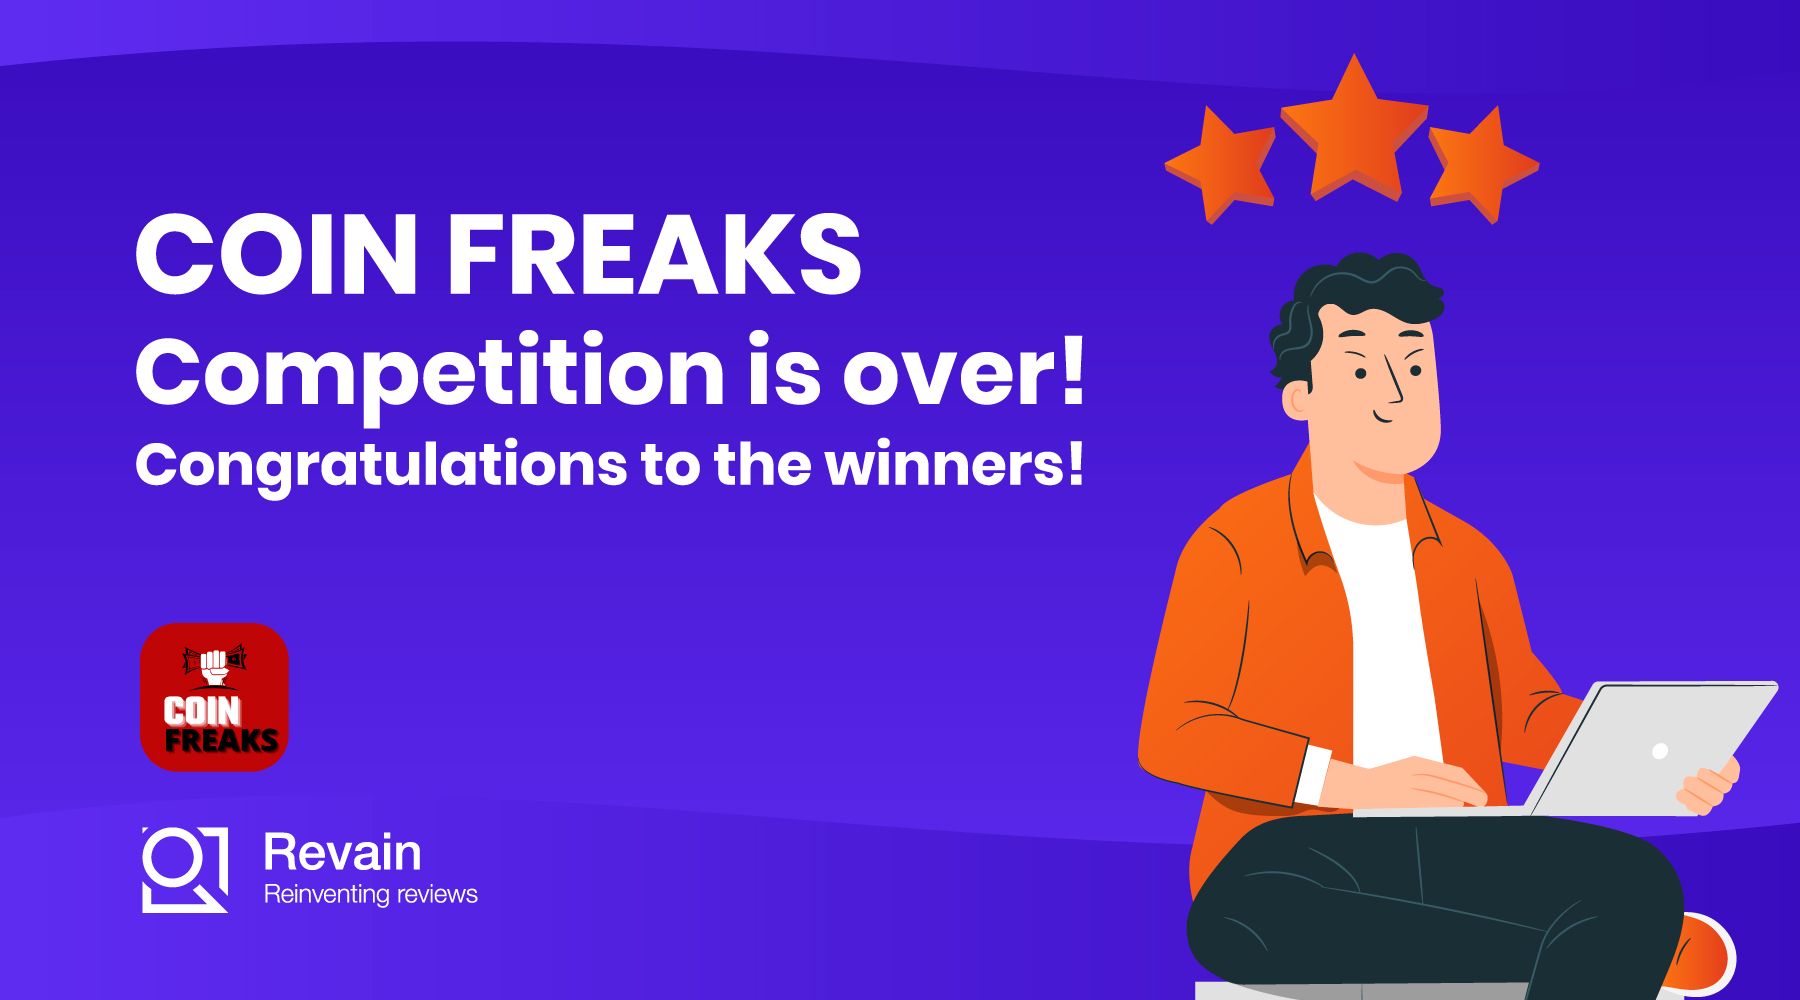 Revain and Coin Freaks review competition is over!